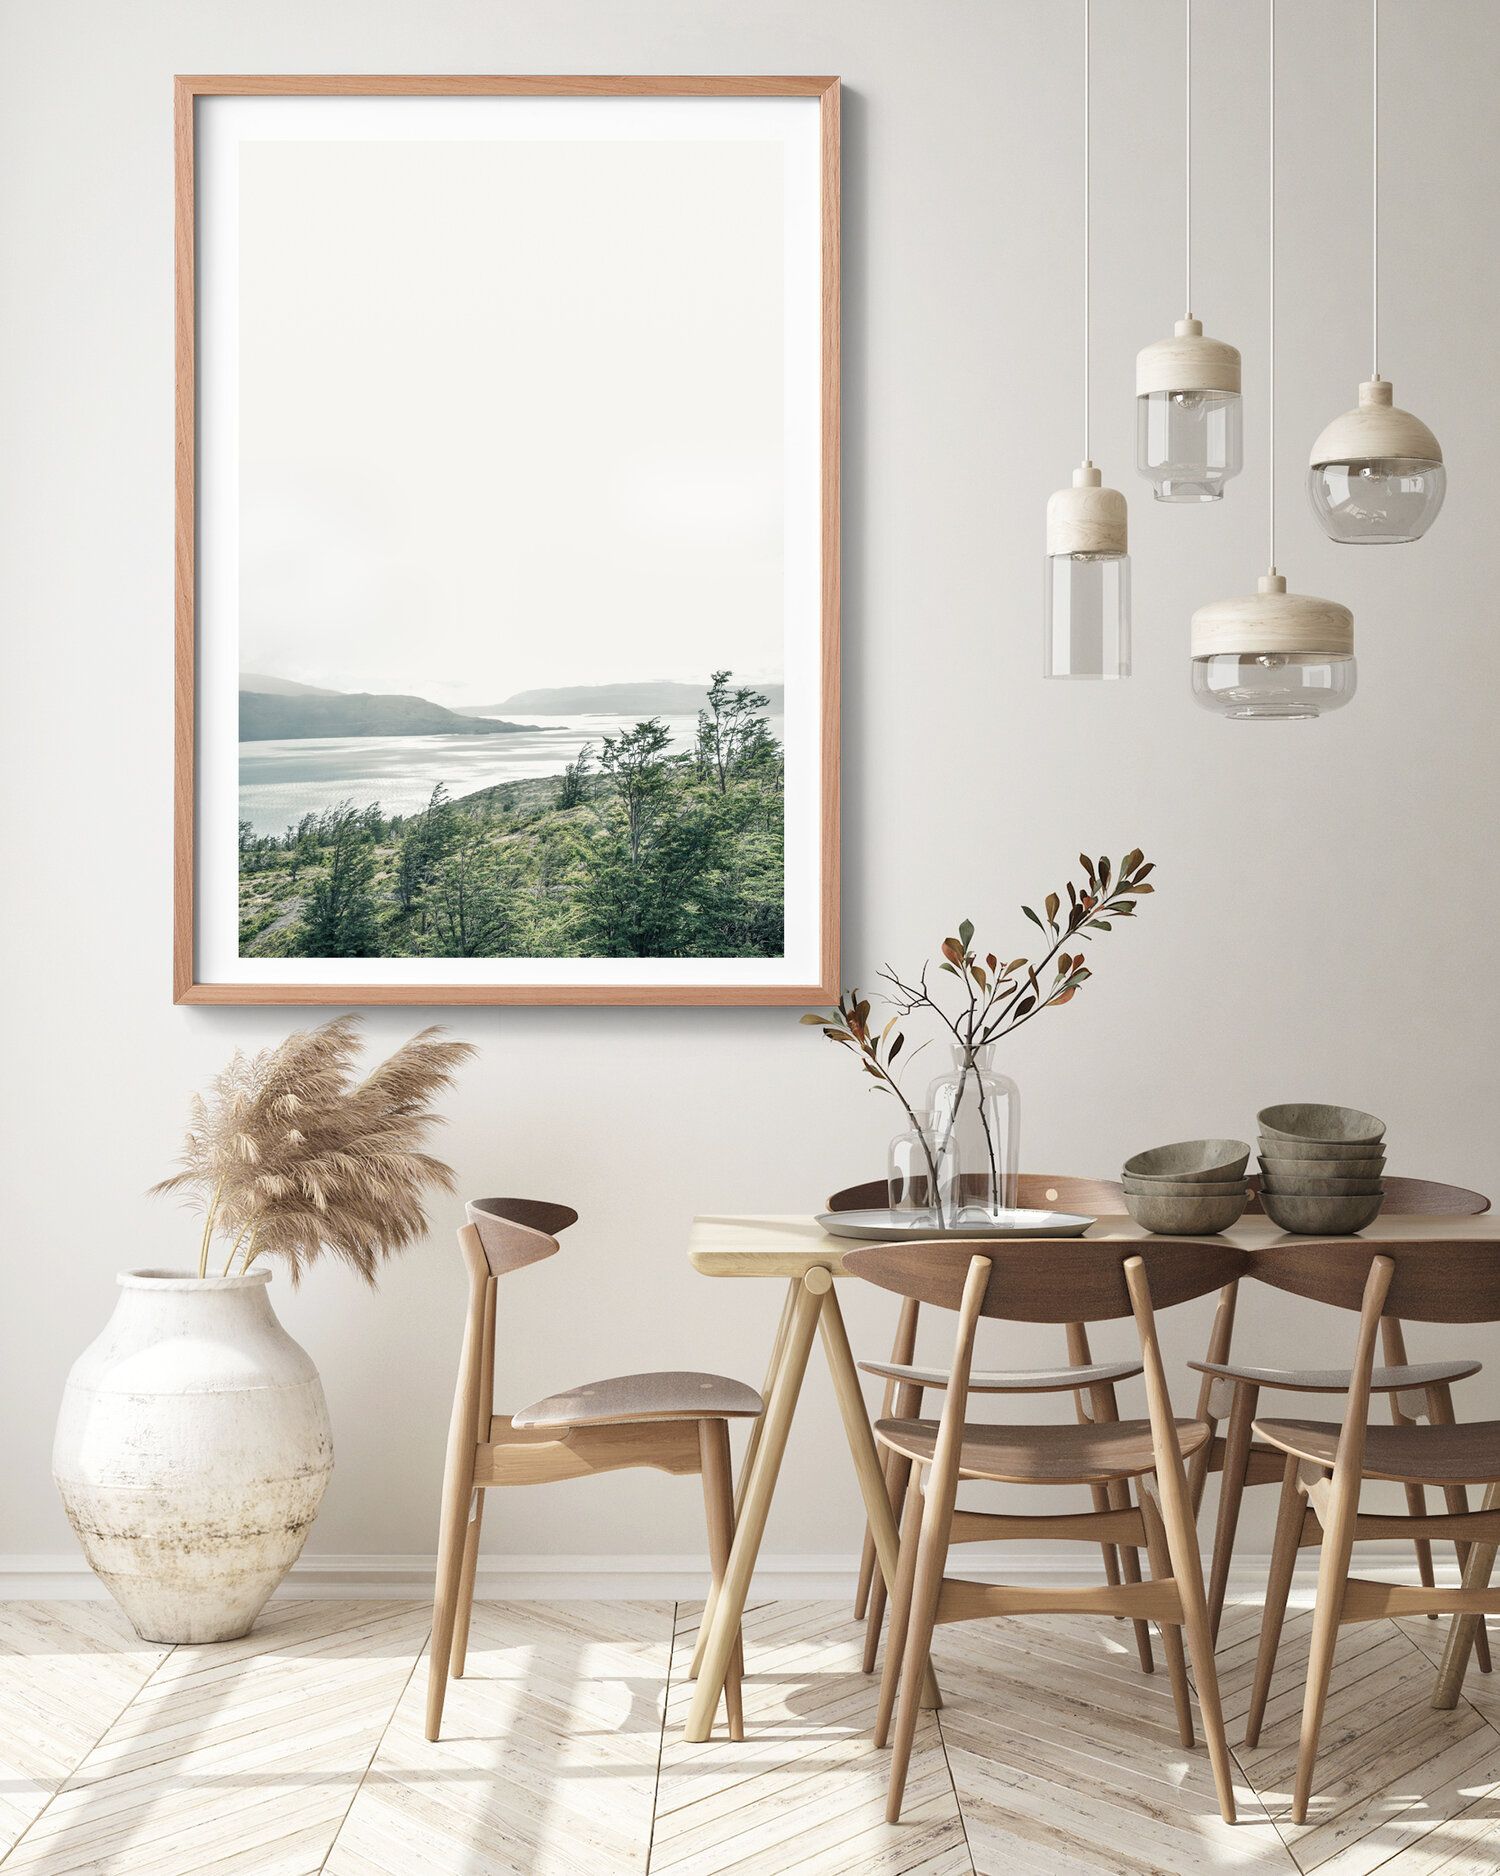 A Natural Frame for Your Imagery Window in Minimalist Dining Room